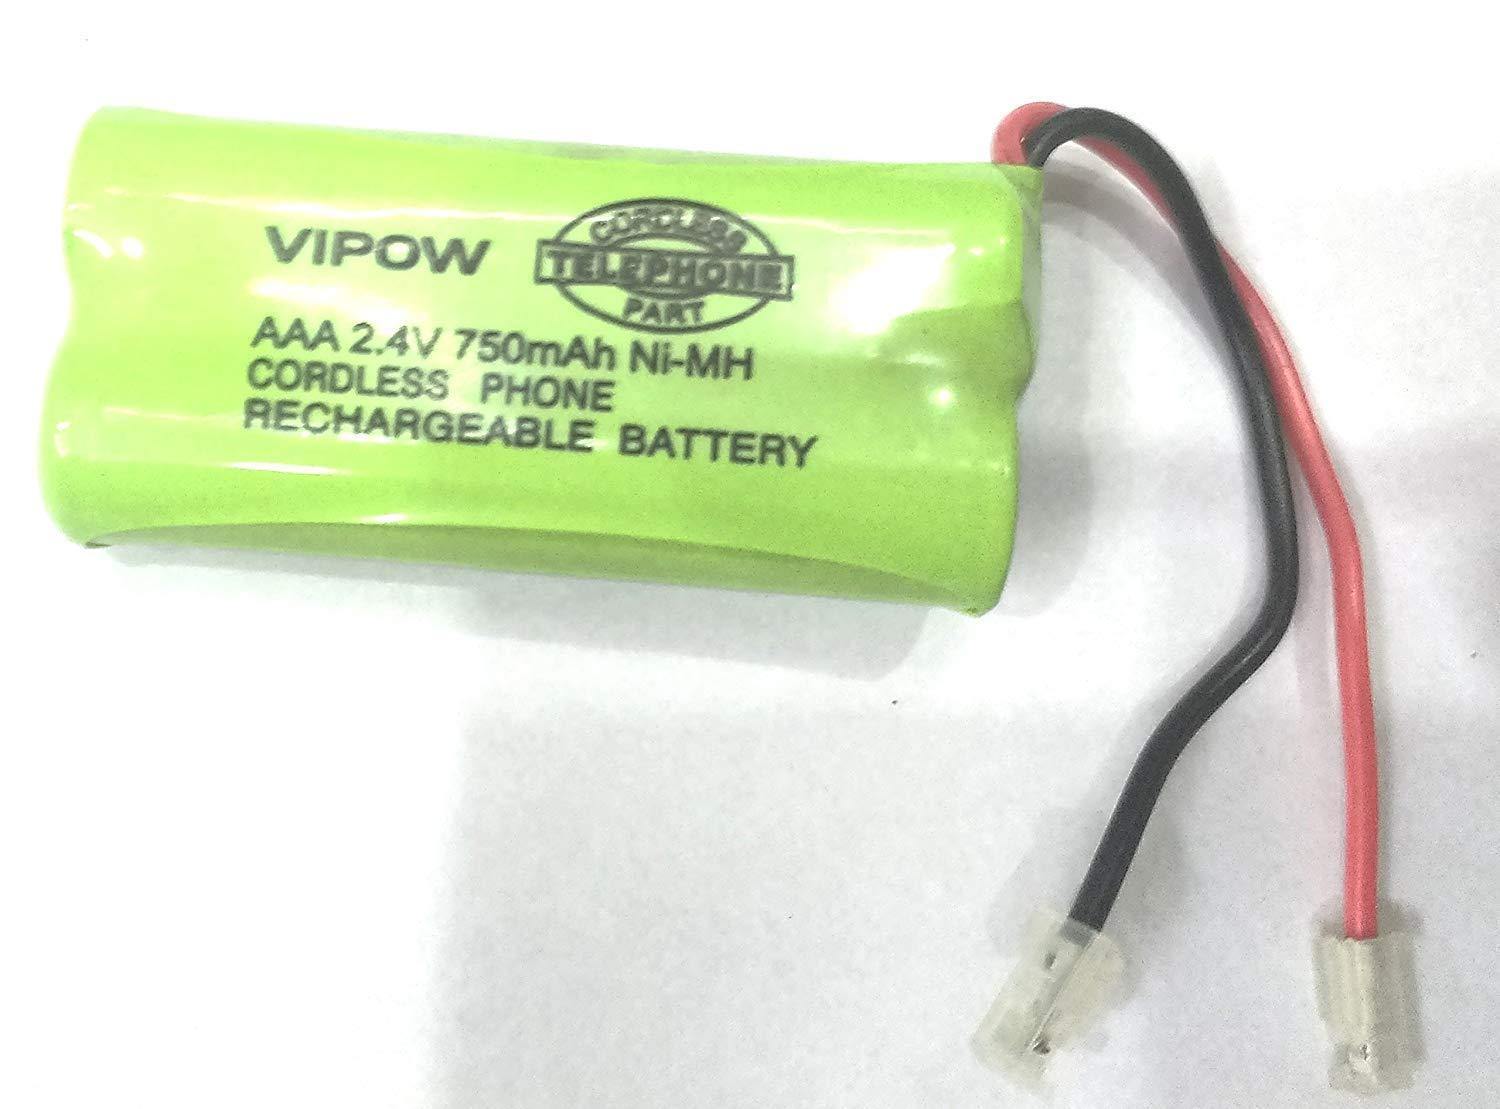 Vipow AAA 2.4V 750mah Ni-Mh Cordless Phone Rechargeable Battery Pack-Rechargeable Batteries-dealsplant